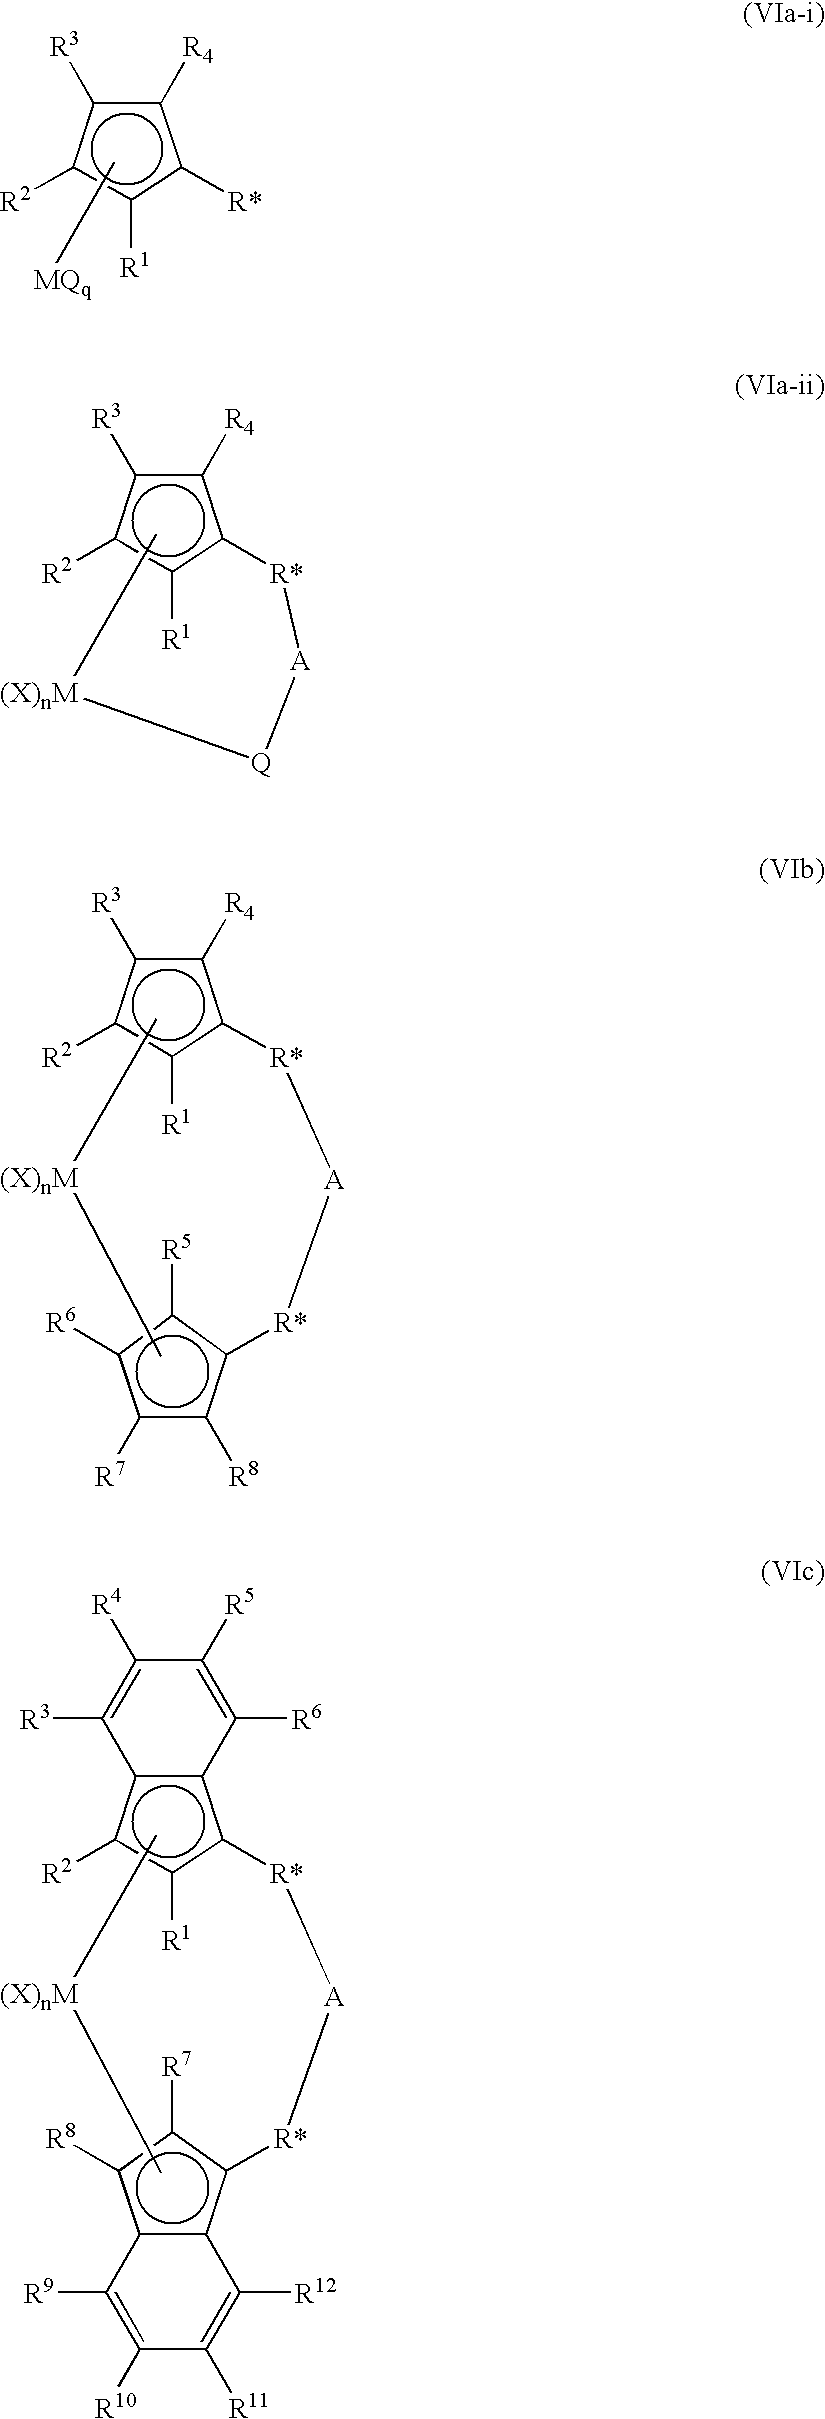 Synthesis of polymerization catalyst components